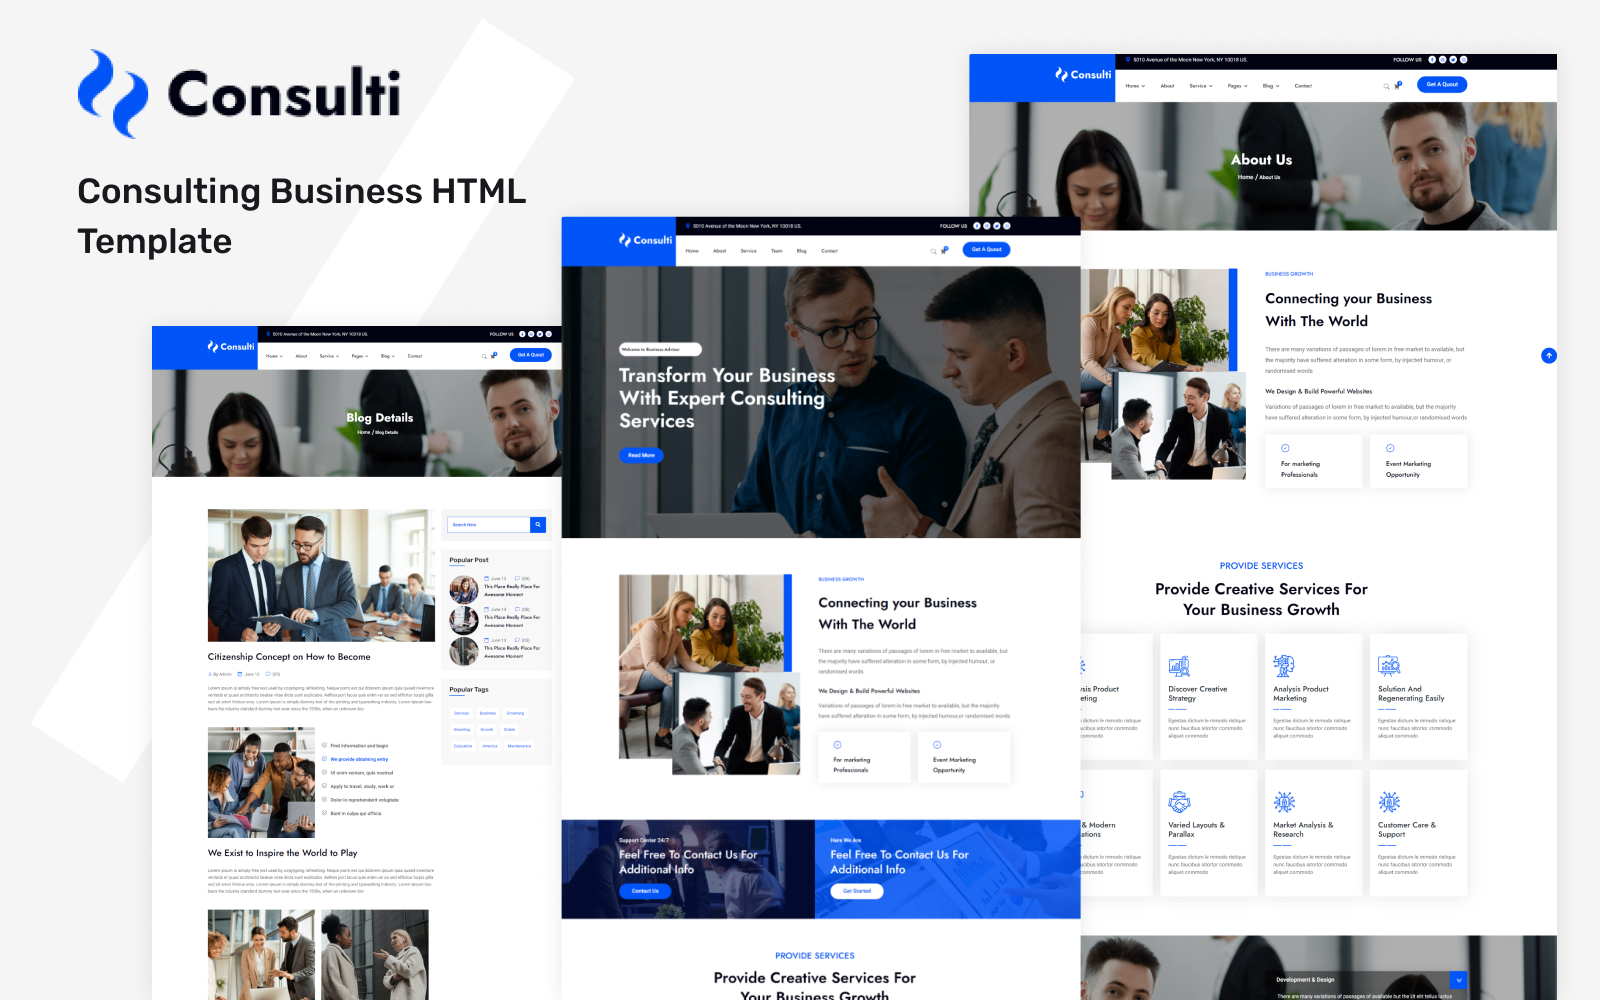 Consulti - Consulting Business HTML Template